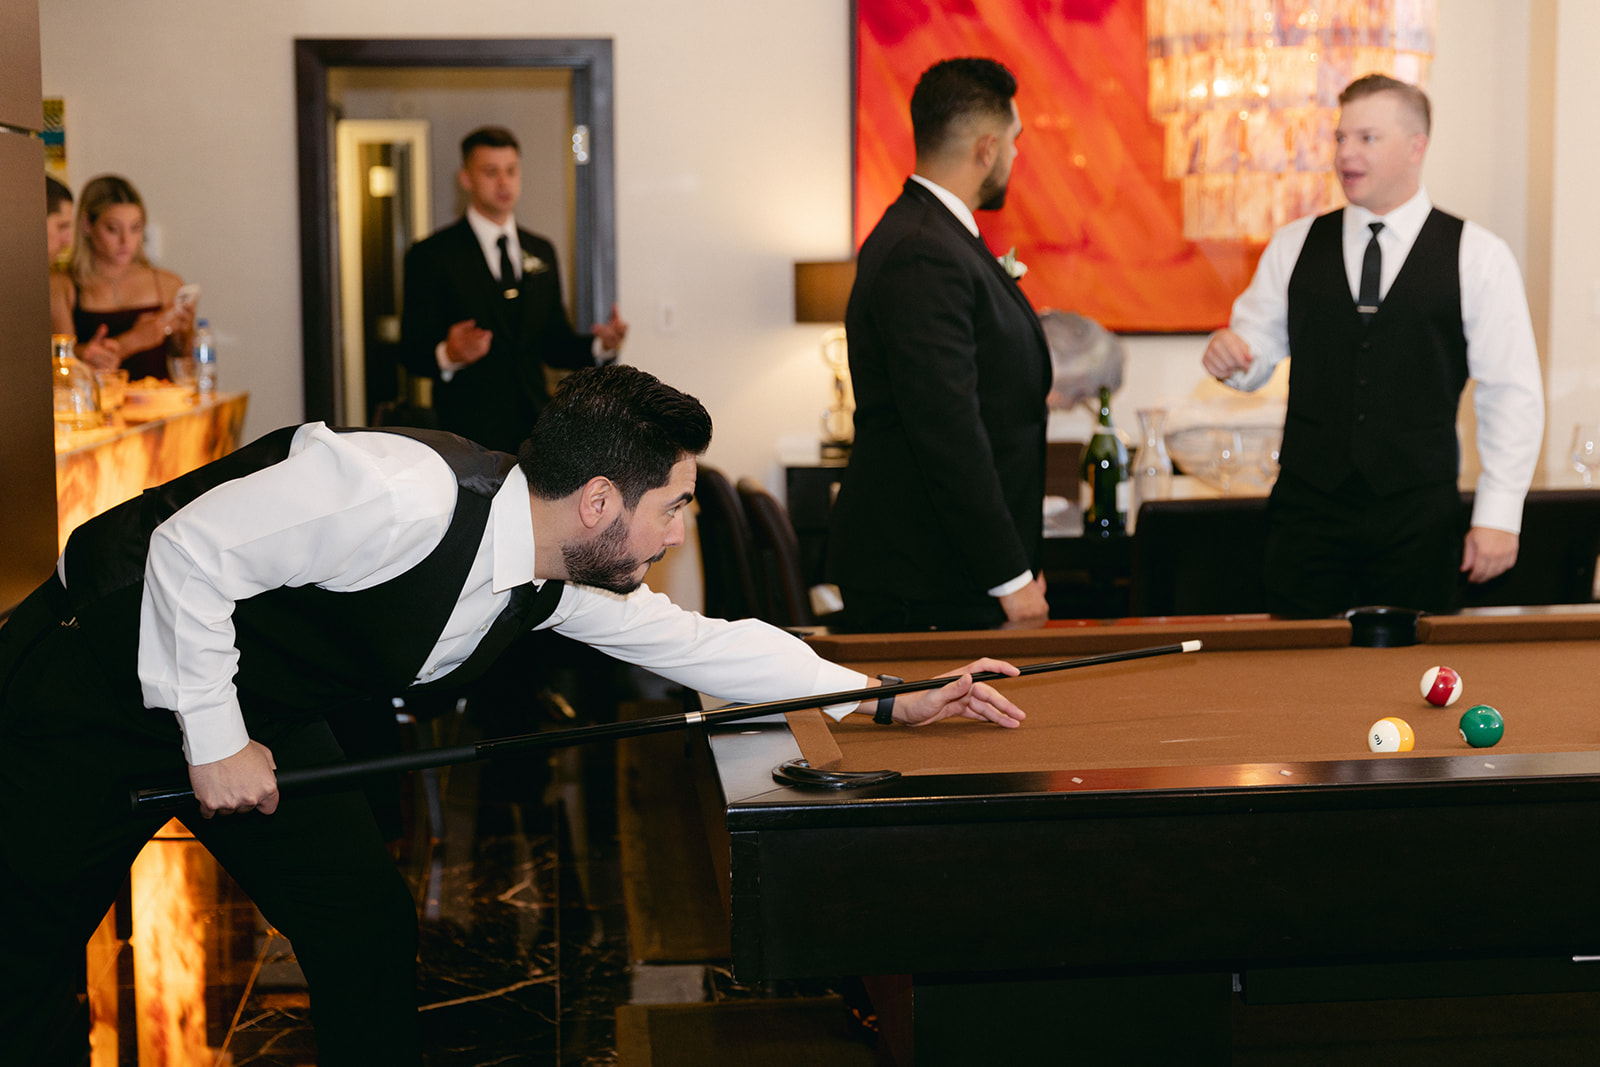 Groomsmen playing pool while waiting for wedding ceremony 